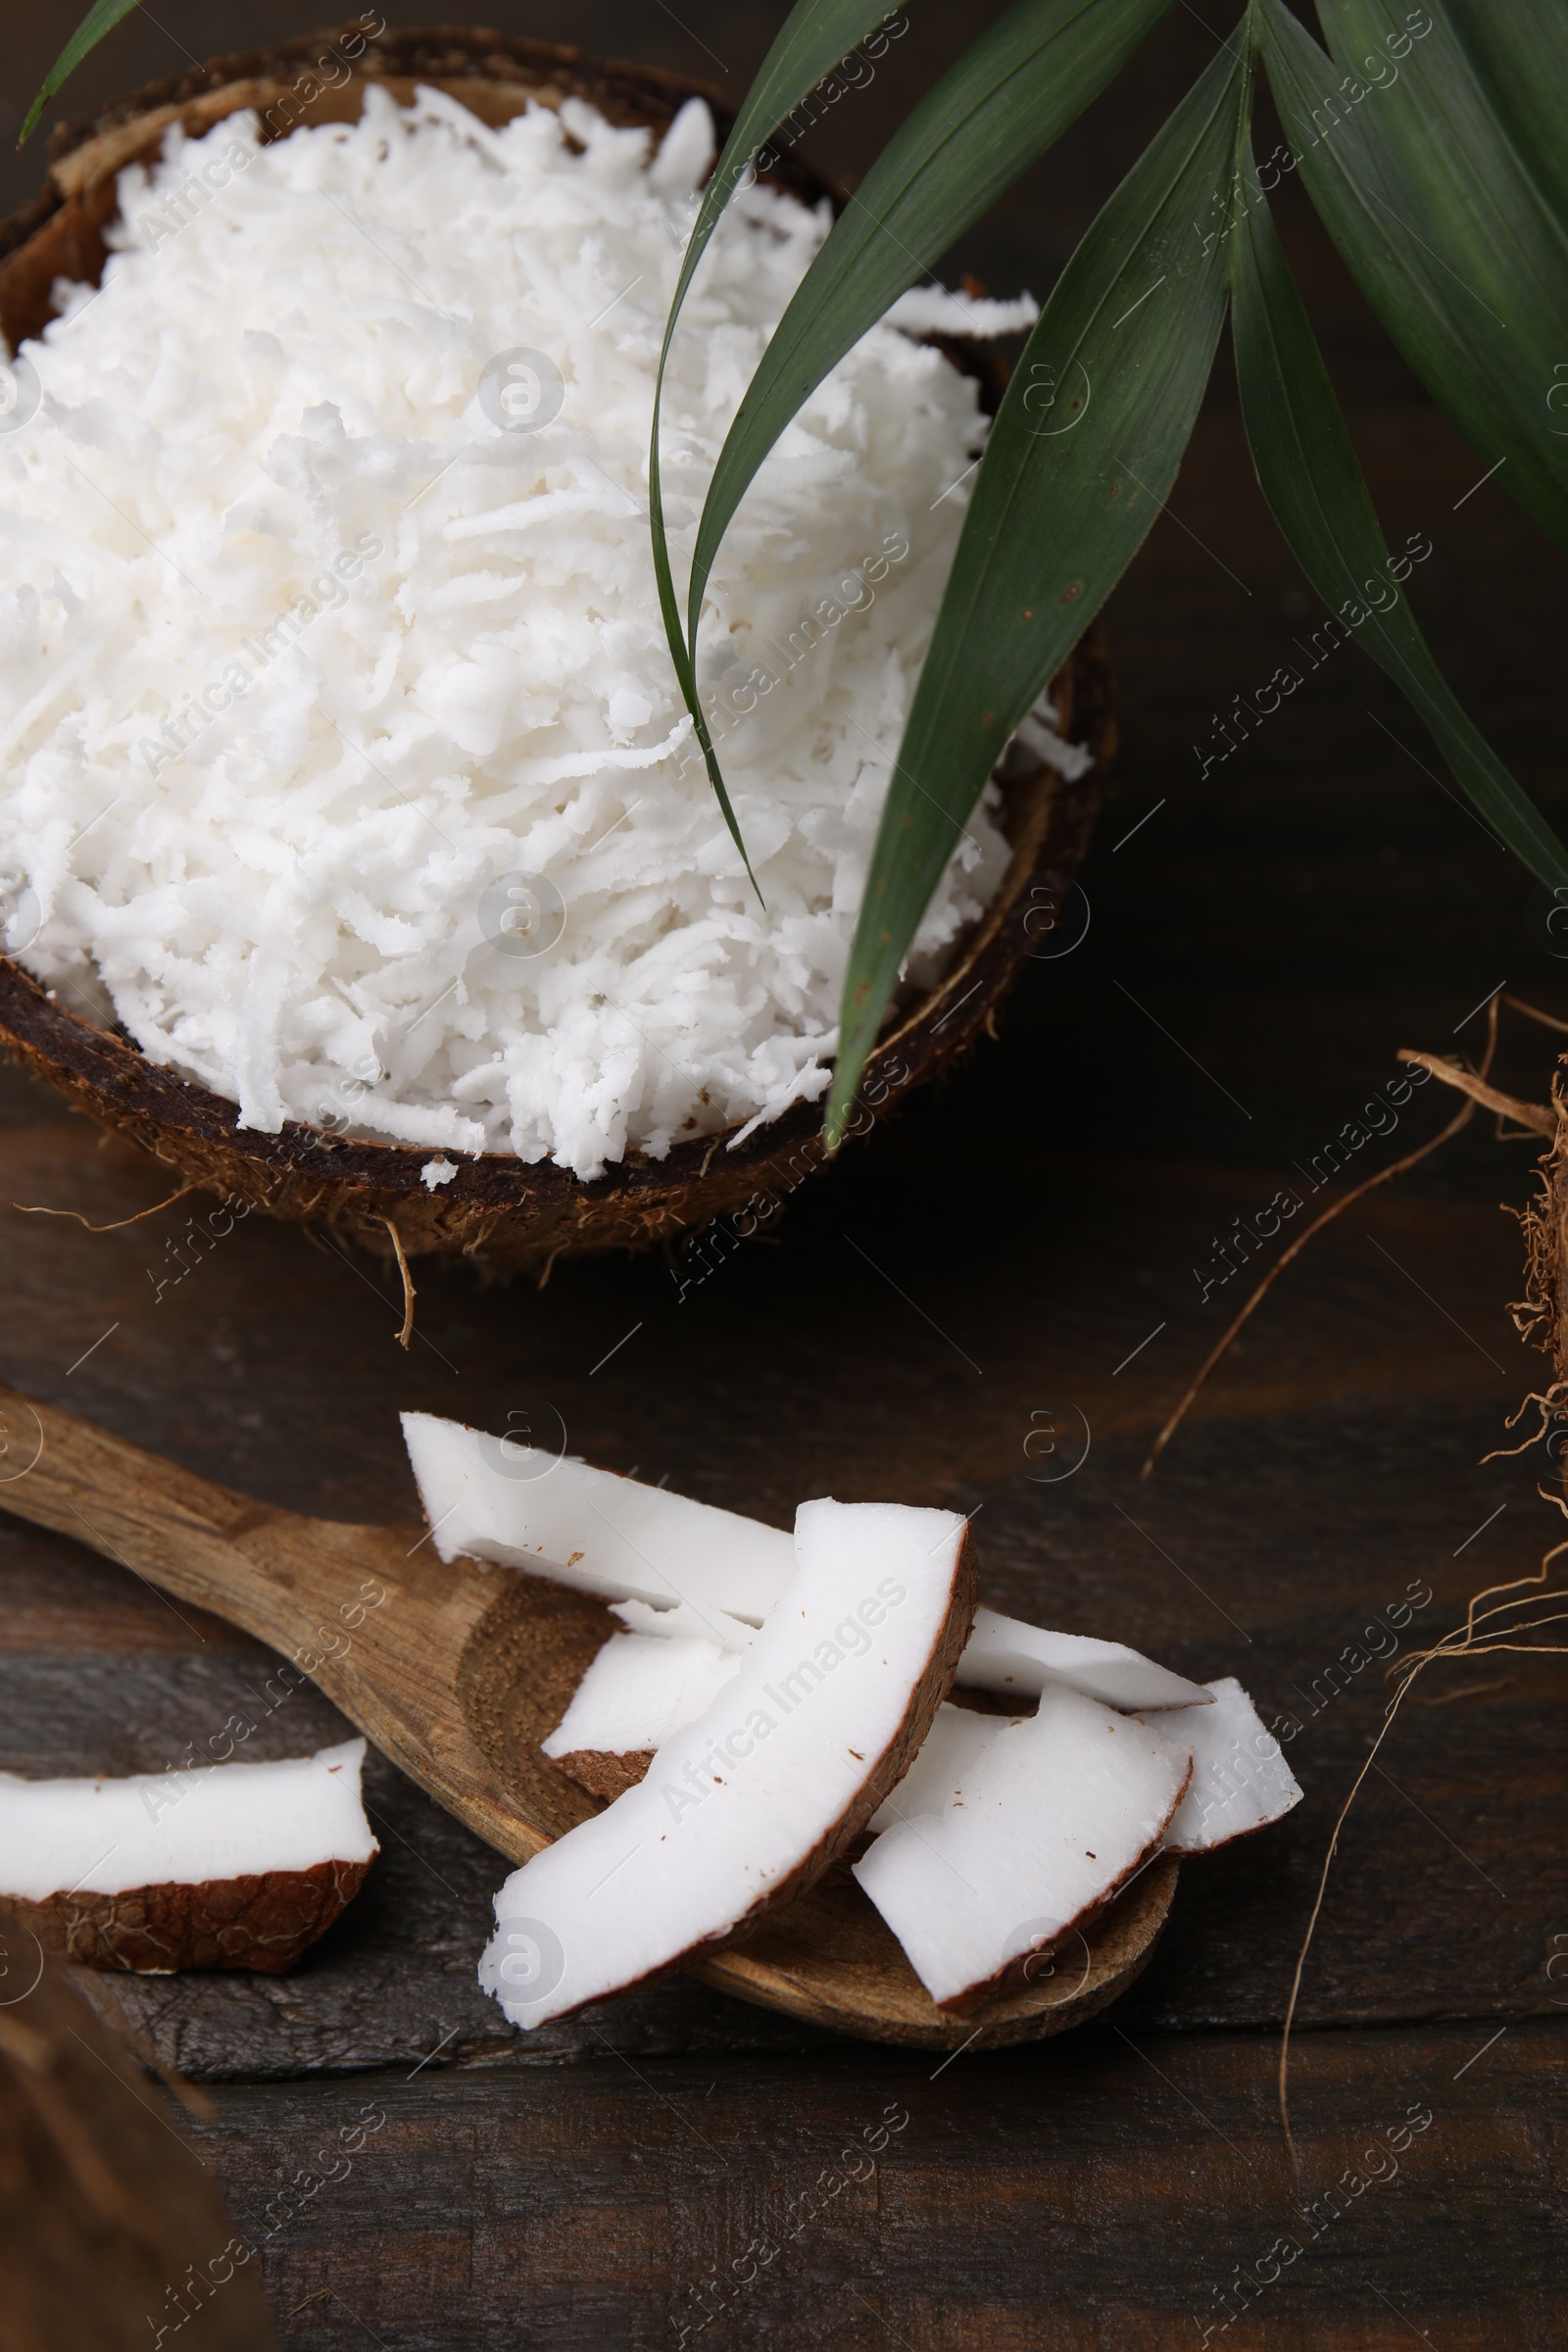 Photo of Coconut flakes, spoon, nut and palm leaf on wooden table